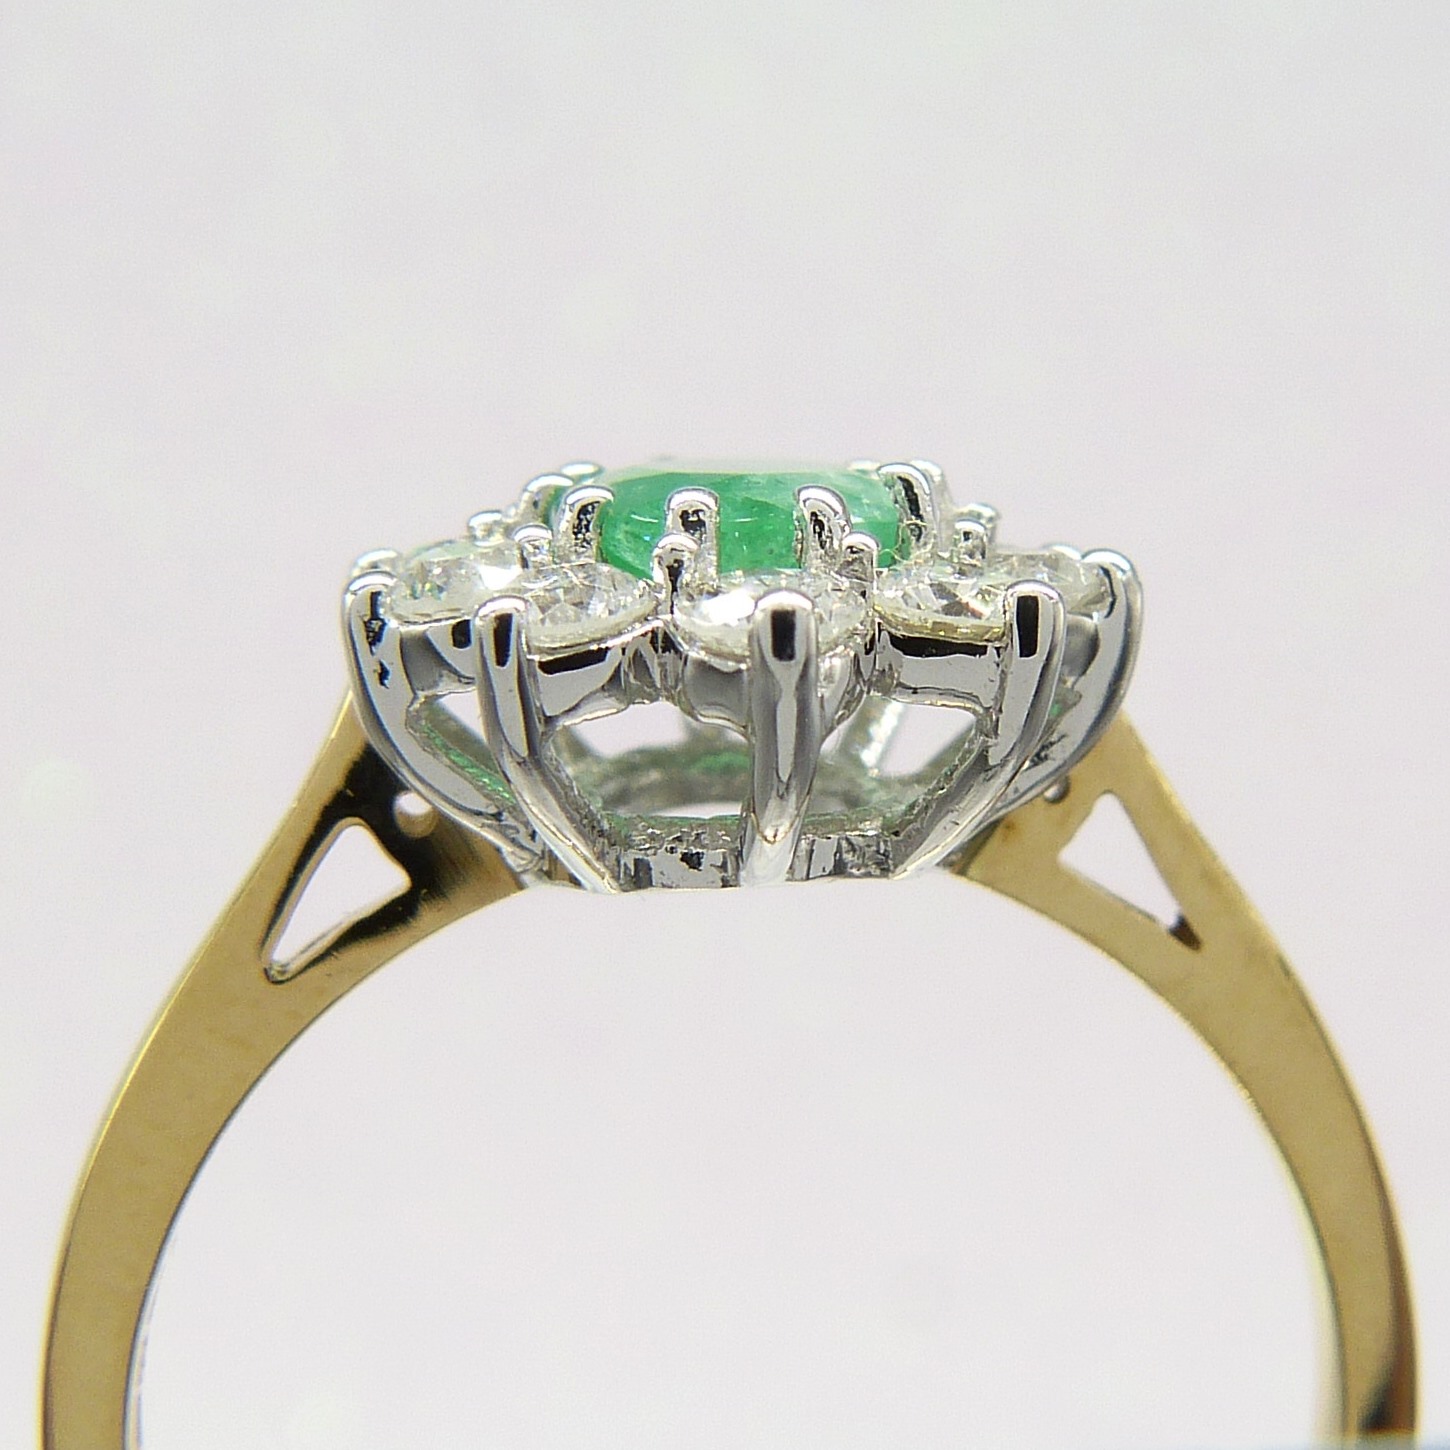 Certificated 18ct Yellow and White Gold Emerald and Diamond Cluster Ring - Image 3 of 7